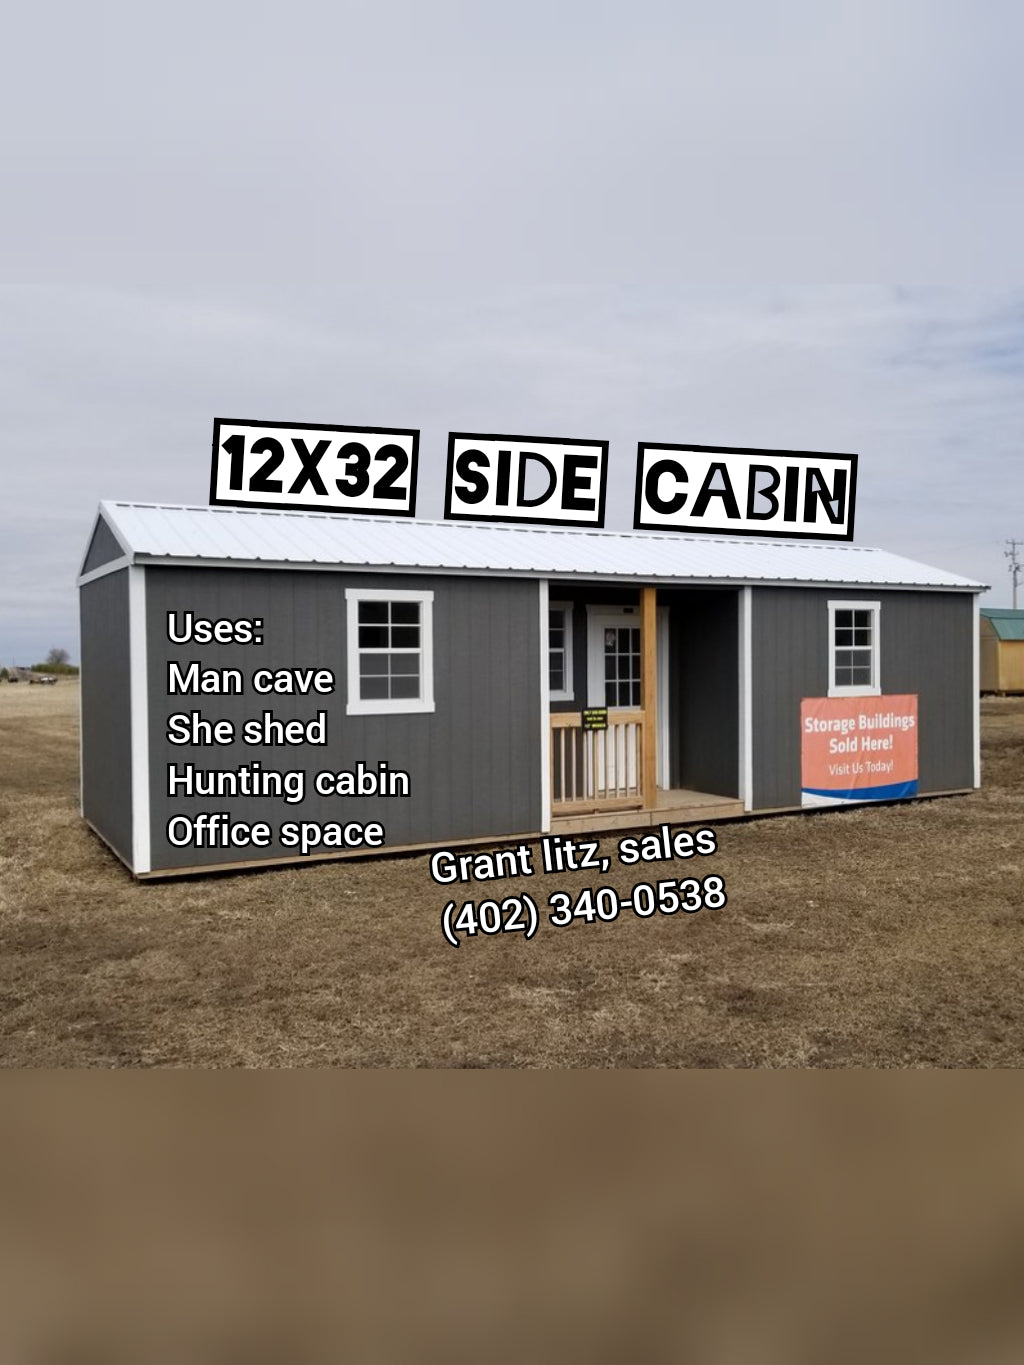 Order One Like This! 12x32 Center Cabin